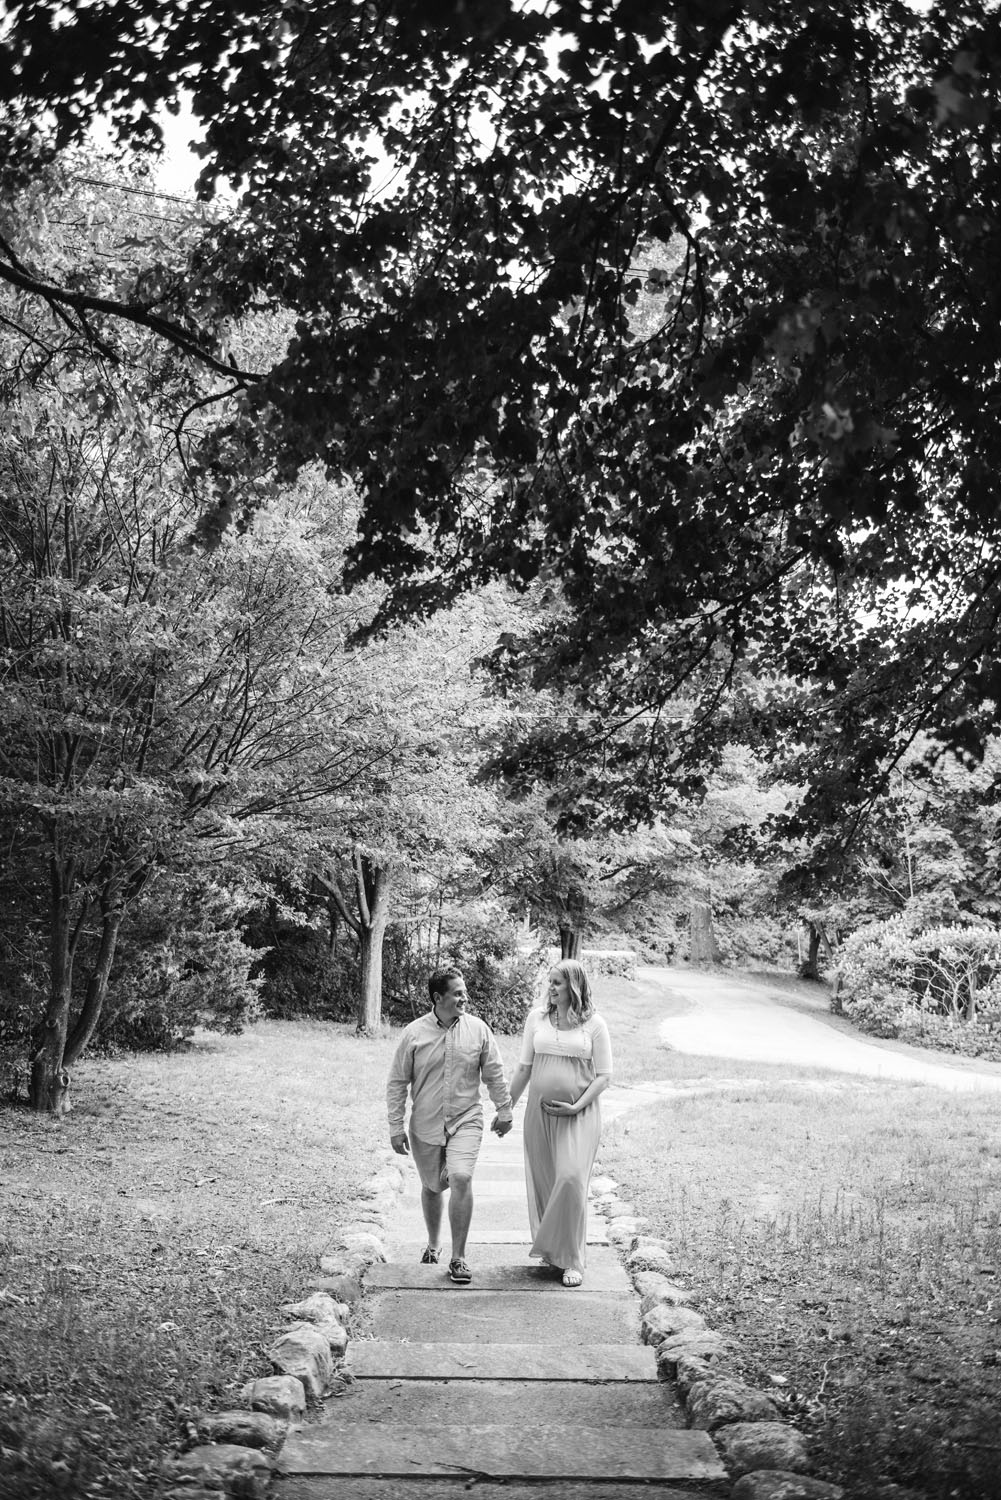 Nick + Kristen | Woodsy Belmont Summer Maternity Session | Boston and New England Portrait Photography | Lorna Stell Photo